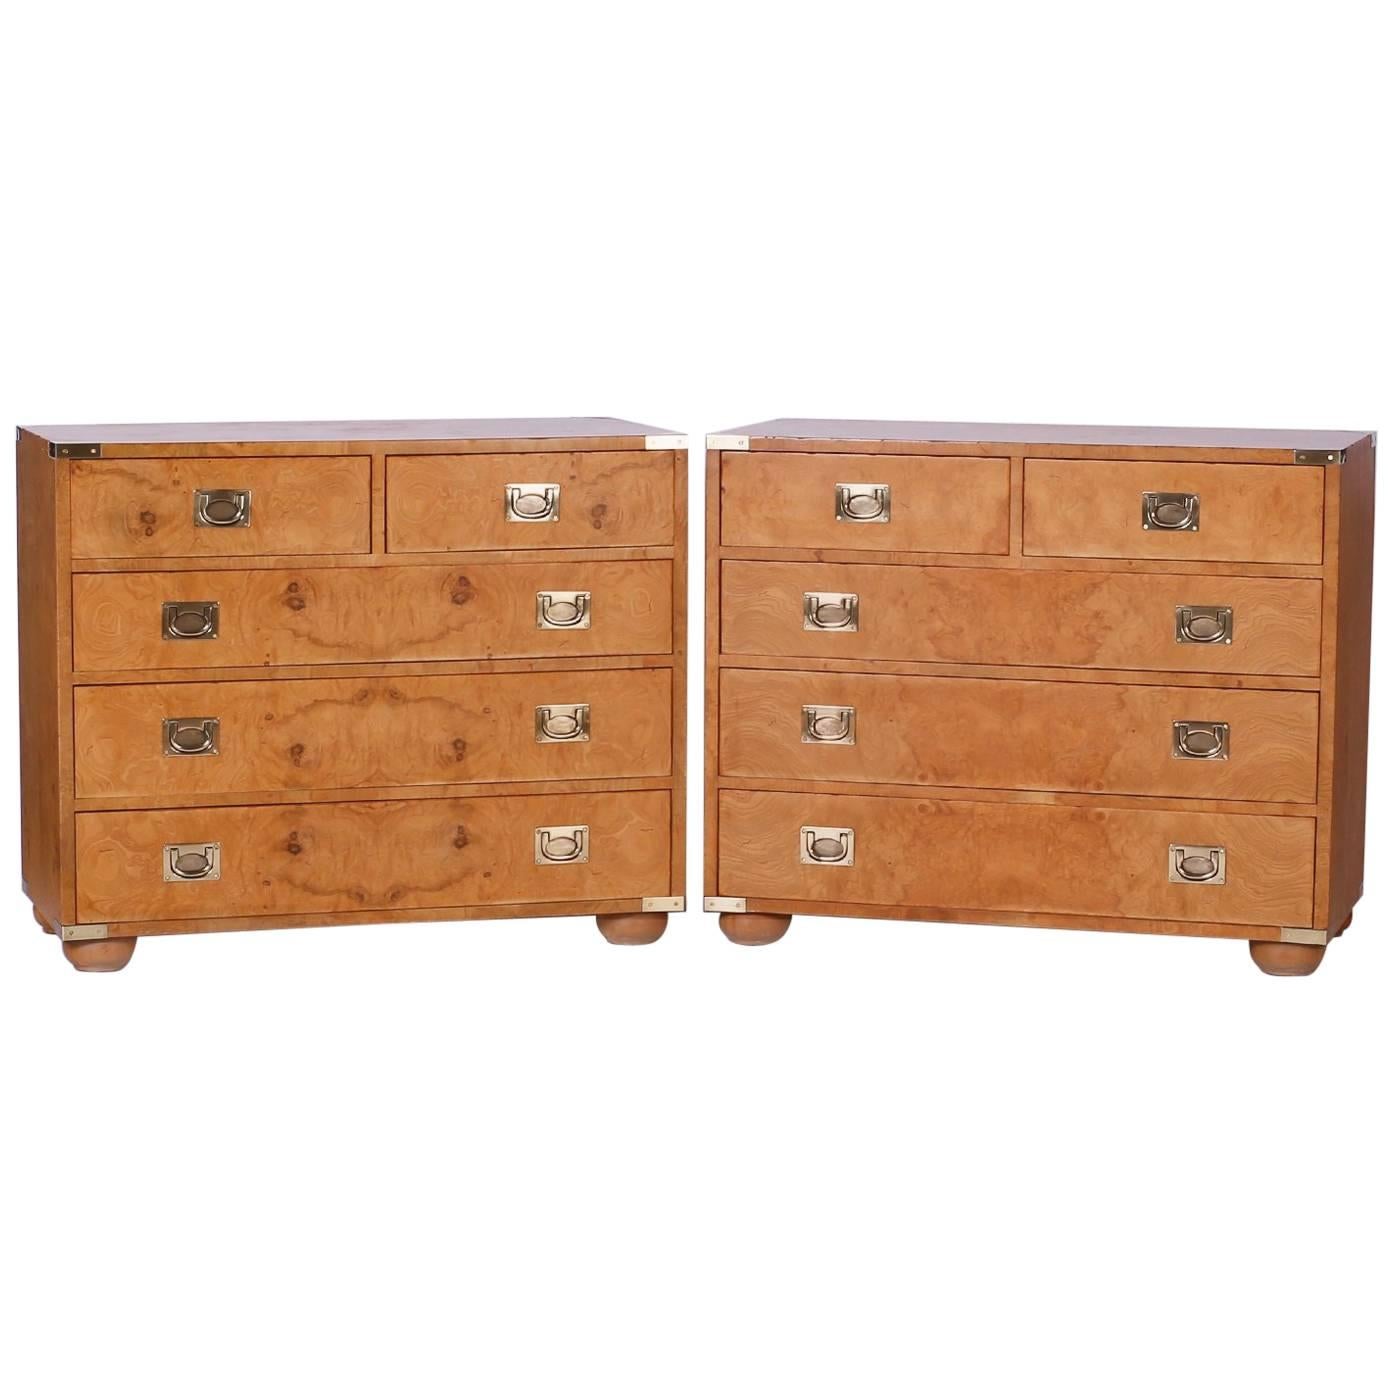 Pair of Midcentury Burl Walnut Campaign Style Chests